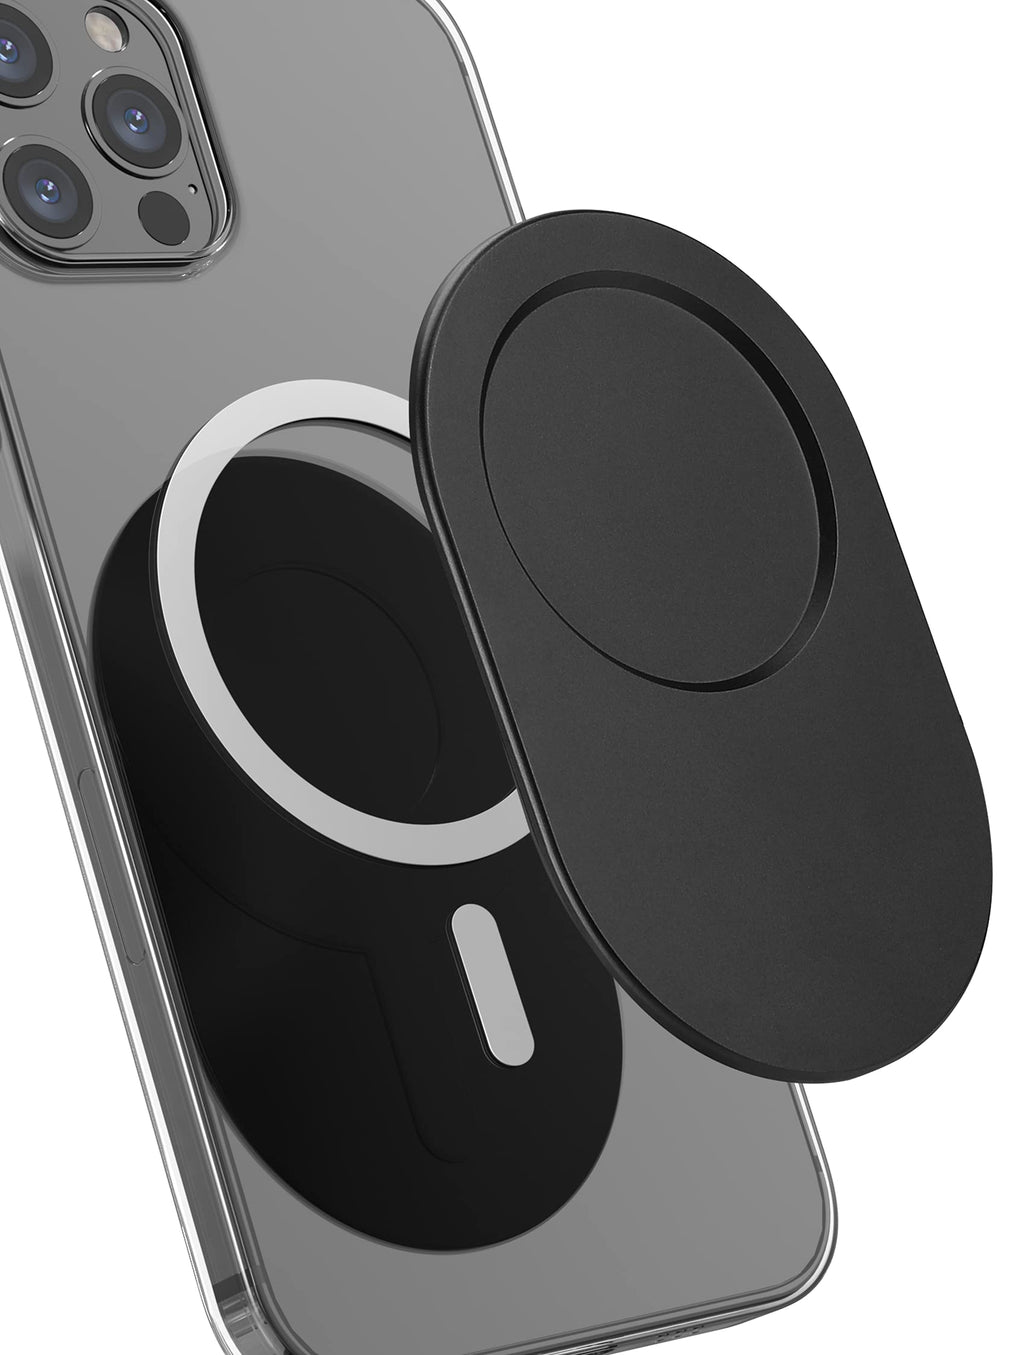 [Australia - AusPower] - metisinno Magnetic Base Plus for iPhone 13 12 MagSafe Accessories Intended for PopSocket Collapsible Grip and Stand, Removable Wireless Charging Compatible Mag Safe Case Must Use - Black 